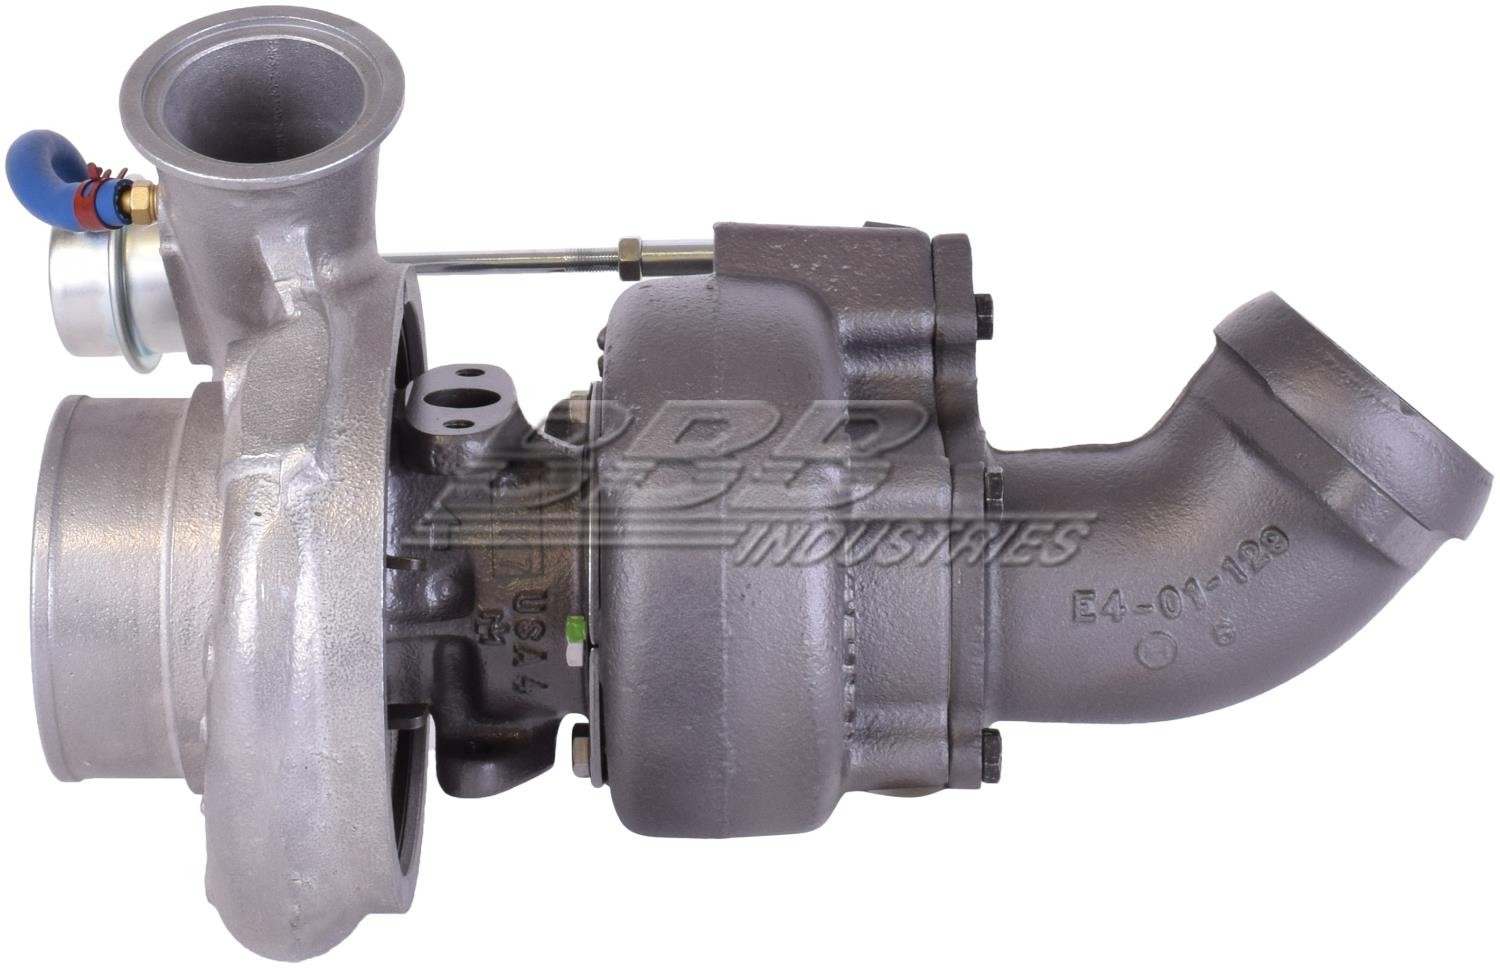 OE-TurboPower Remanufactured Turbocharger  top view frsport D2018